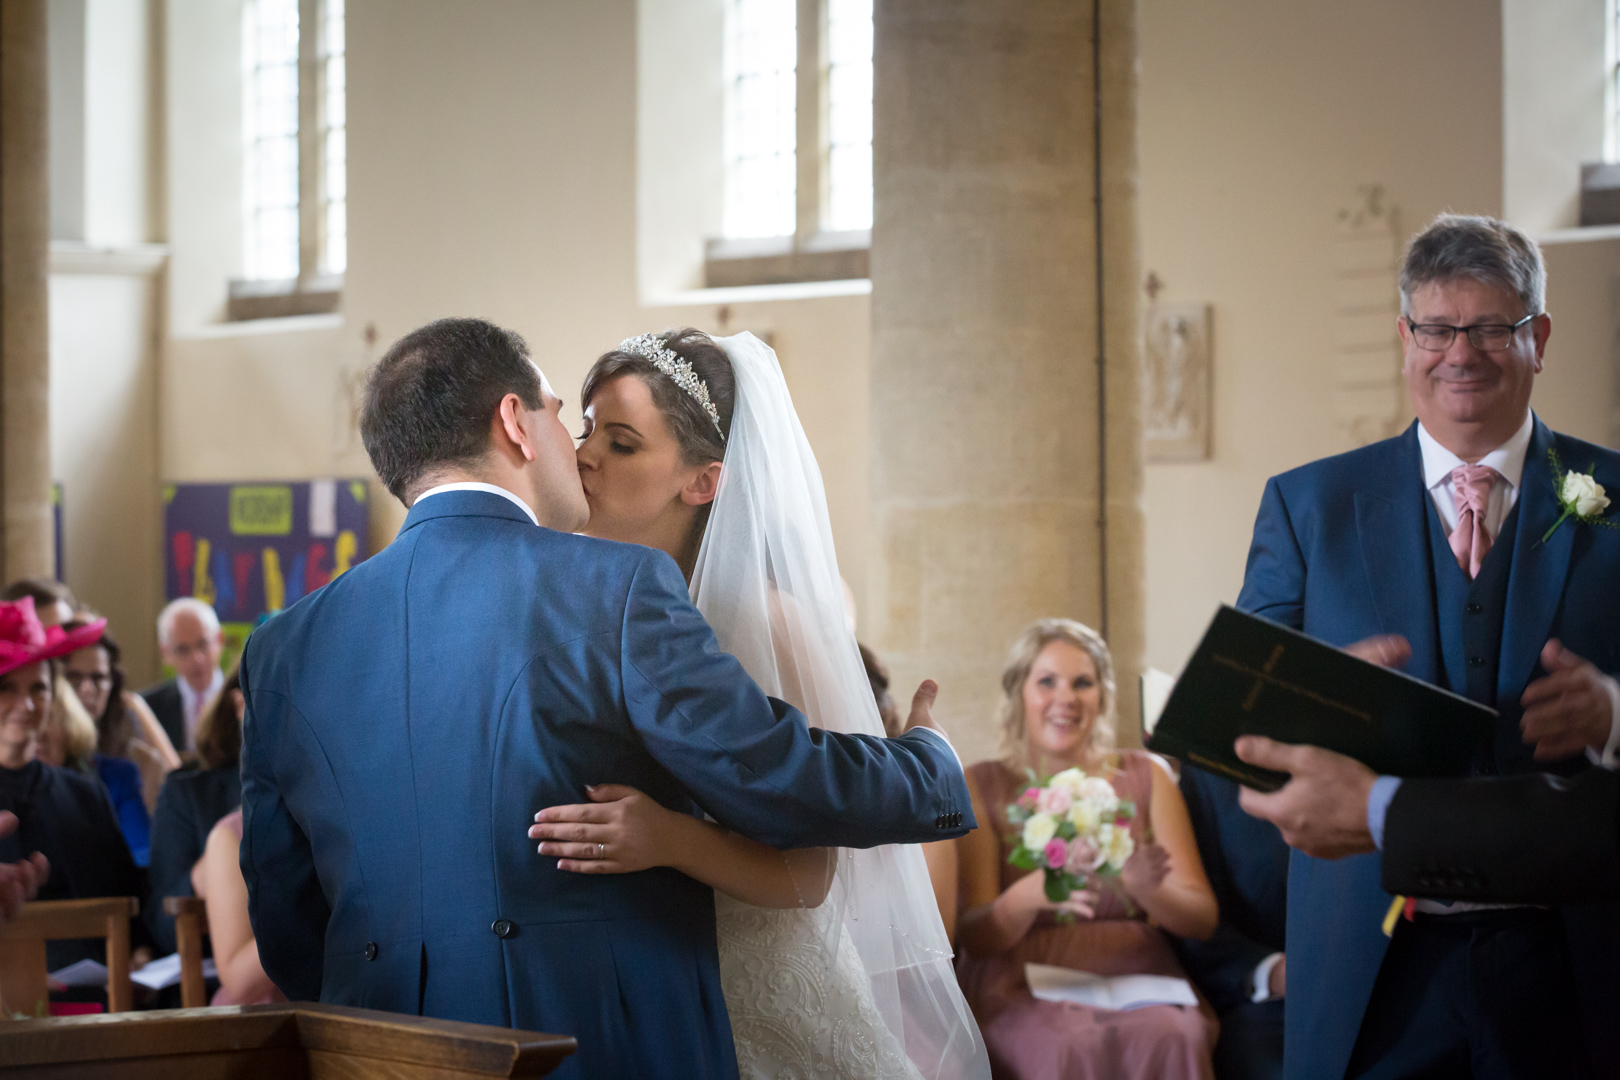 Naomi and Emilio photographed at St Lawrence's Church, Eastcote, Pinner, Middlesex by Tim & Linda Durham of Pinner Wedding Photograph